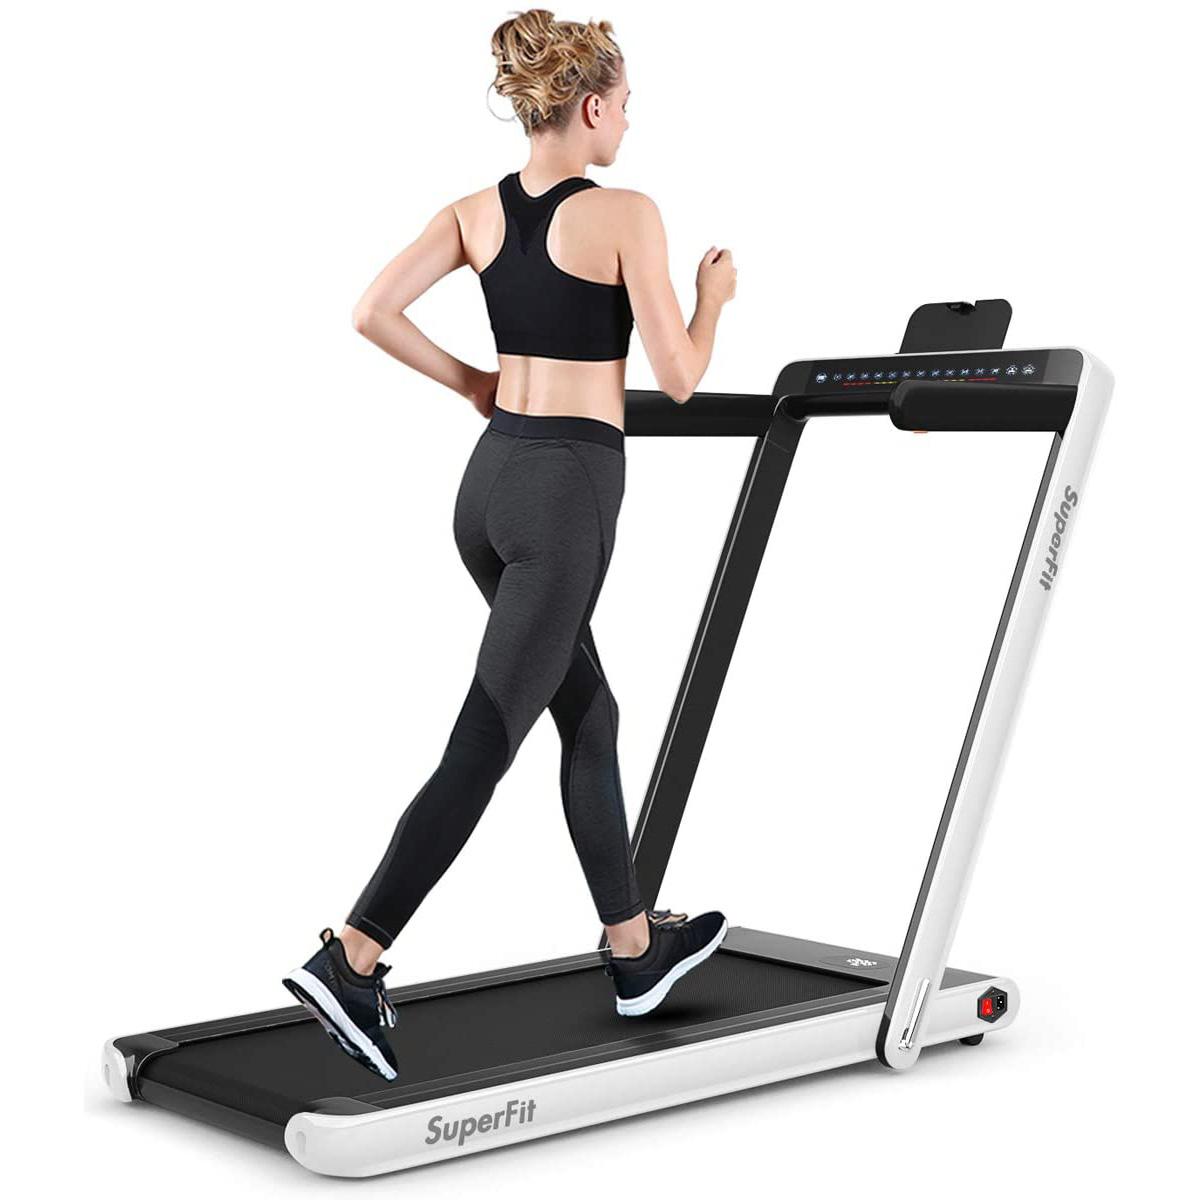 Gymax 2-in-1 Under Desk Folding Treadmill for $314.99 Shipped